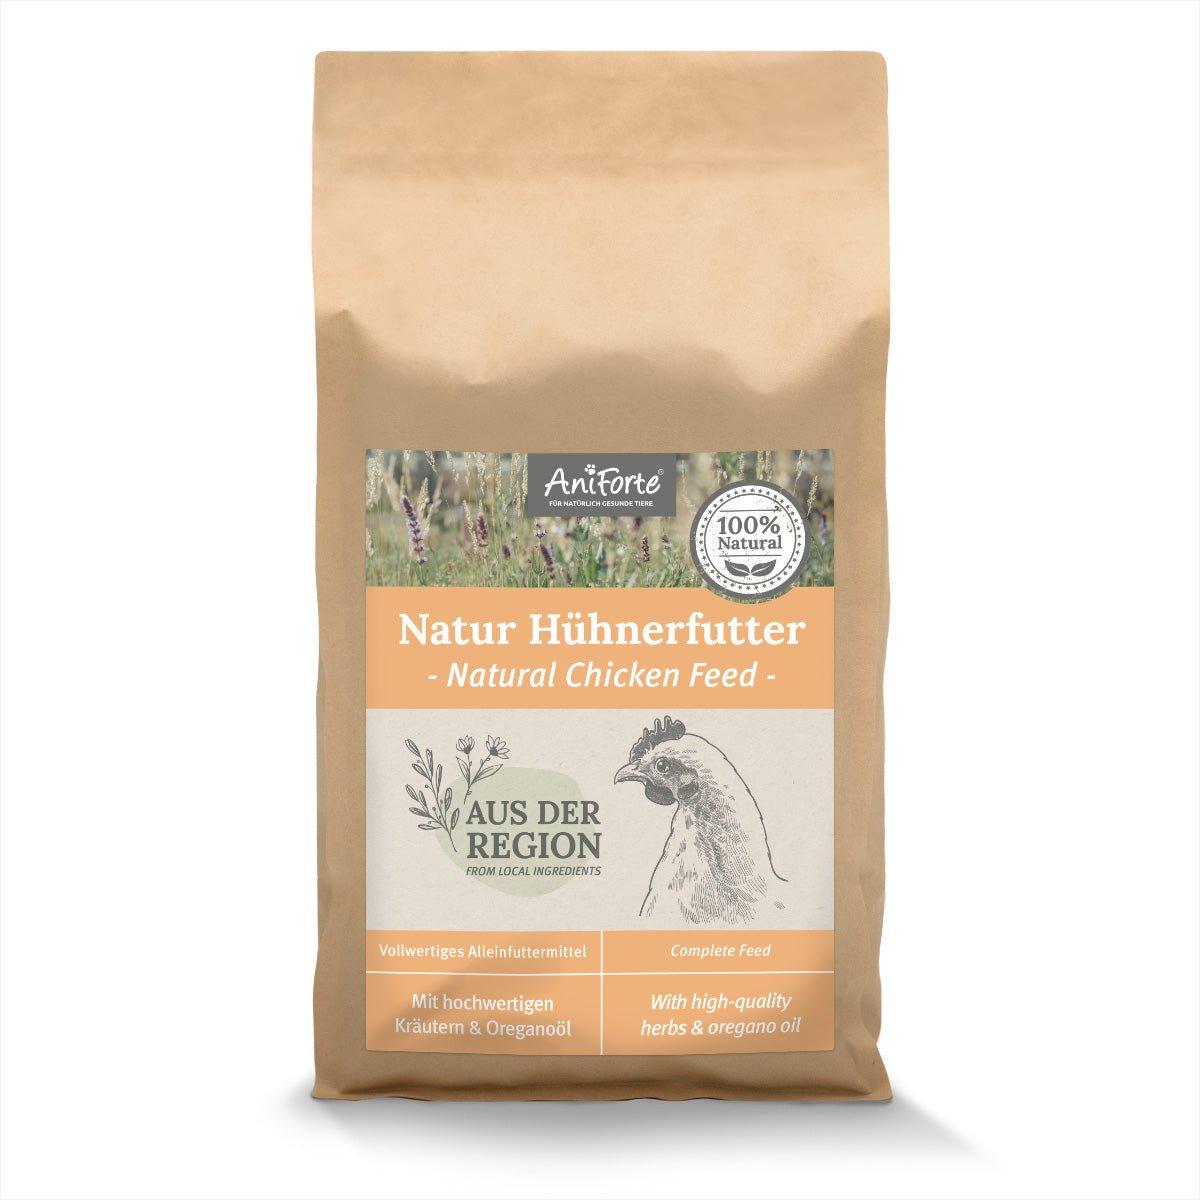 Aniforte Natur Hühnerfutter - Too good to go 7,5 kg